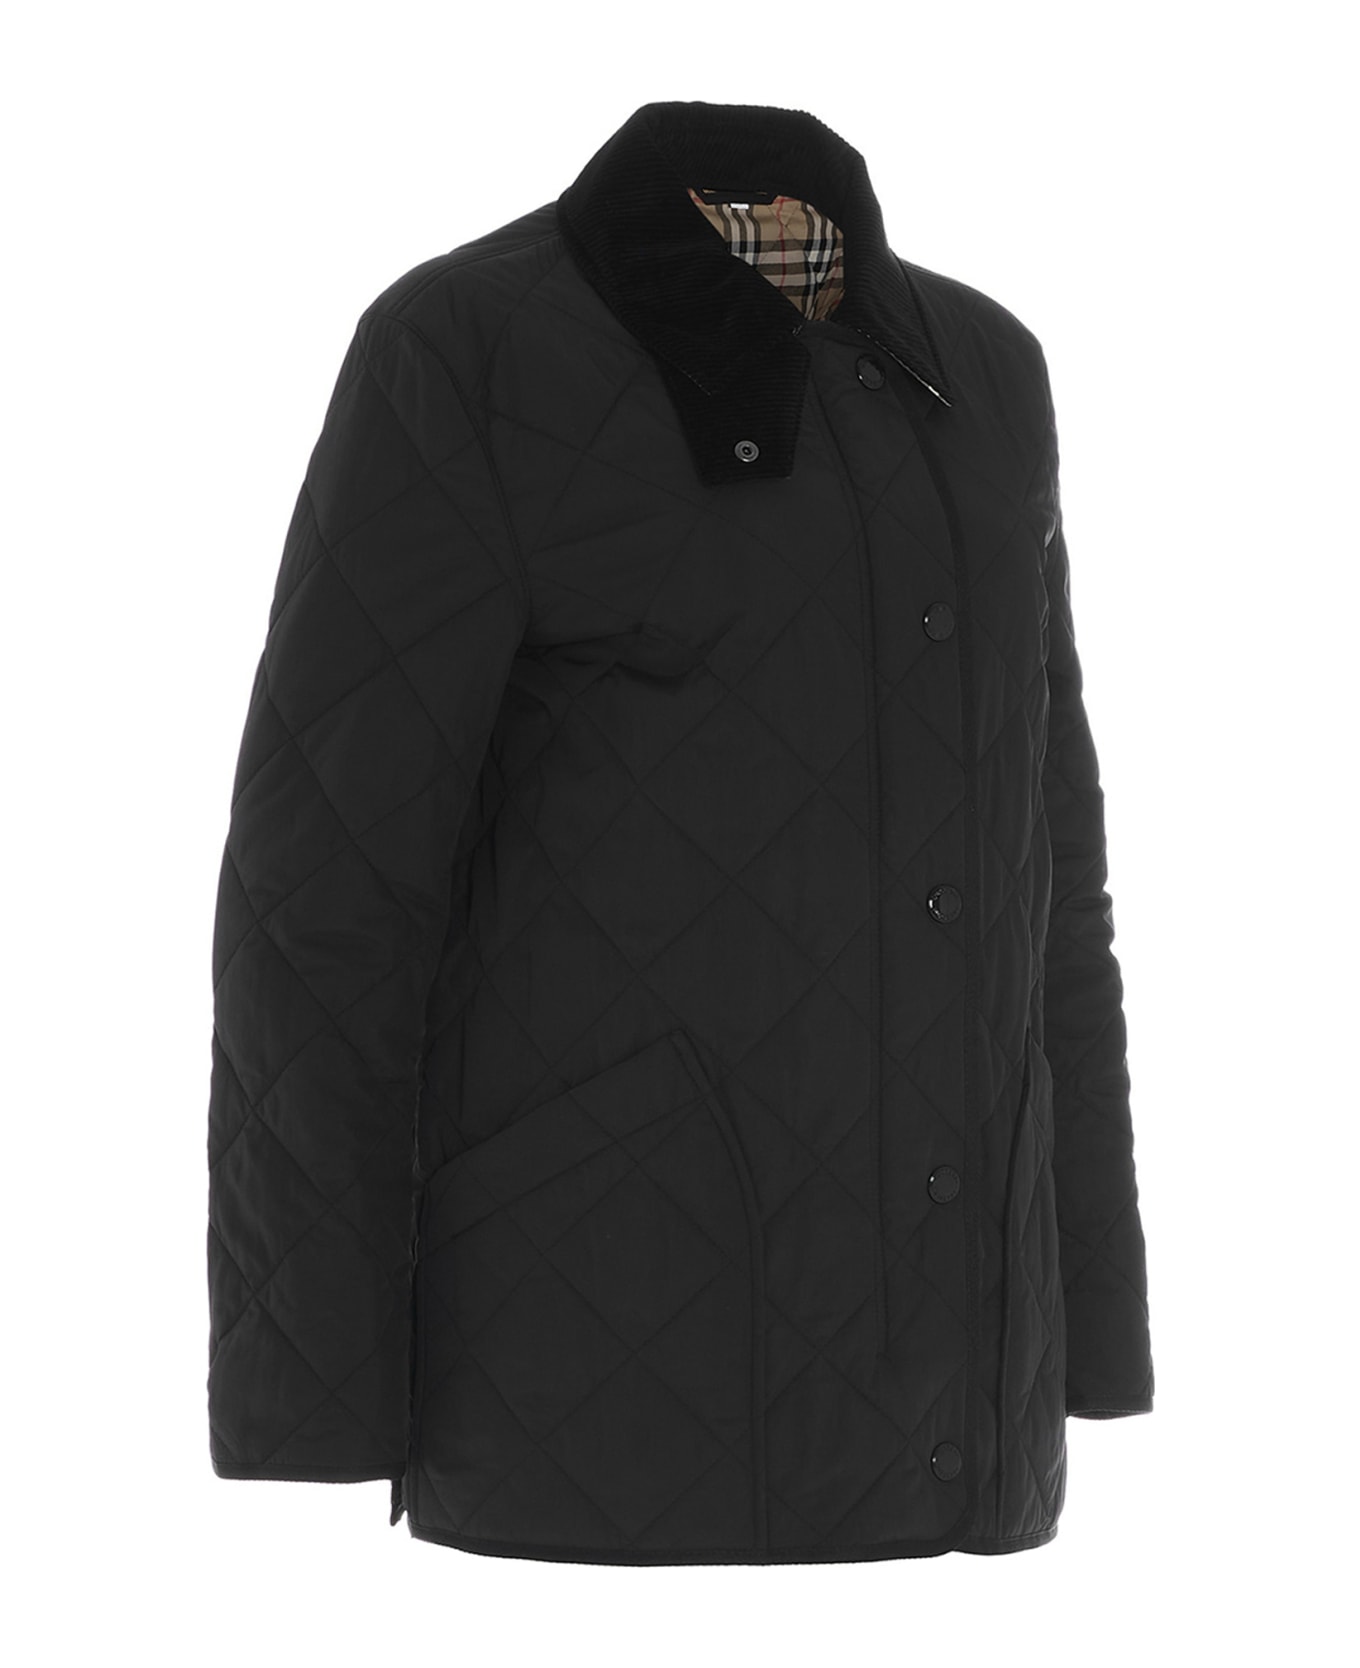 Burberry Quilted Jacket 'cotswold' - Black